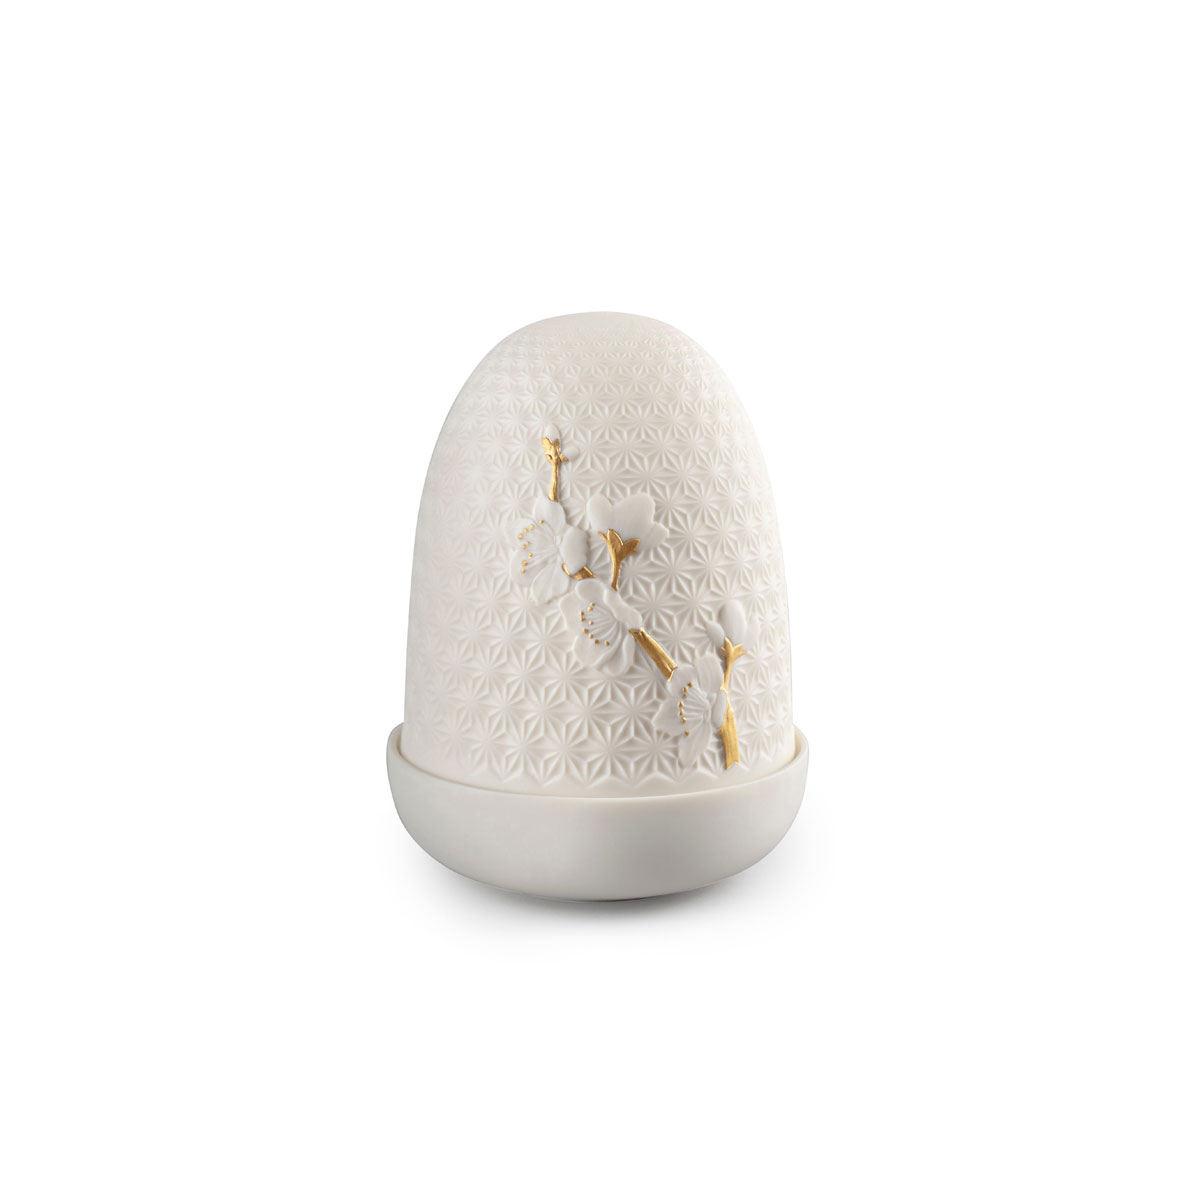 Lladro Light And Fragrance, Cherry Blossoms Dome Table Lamp